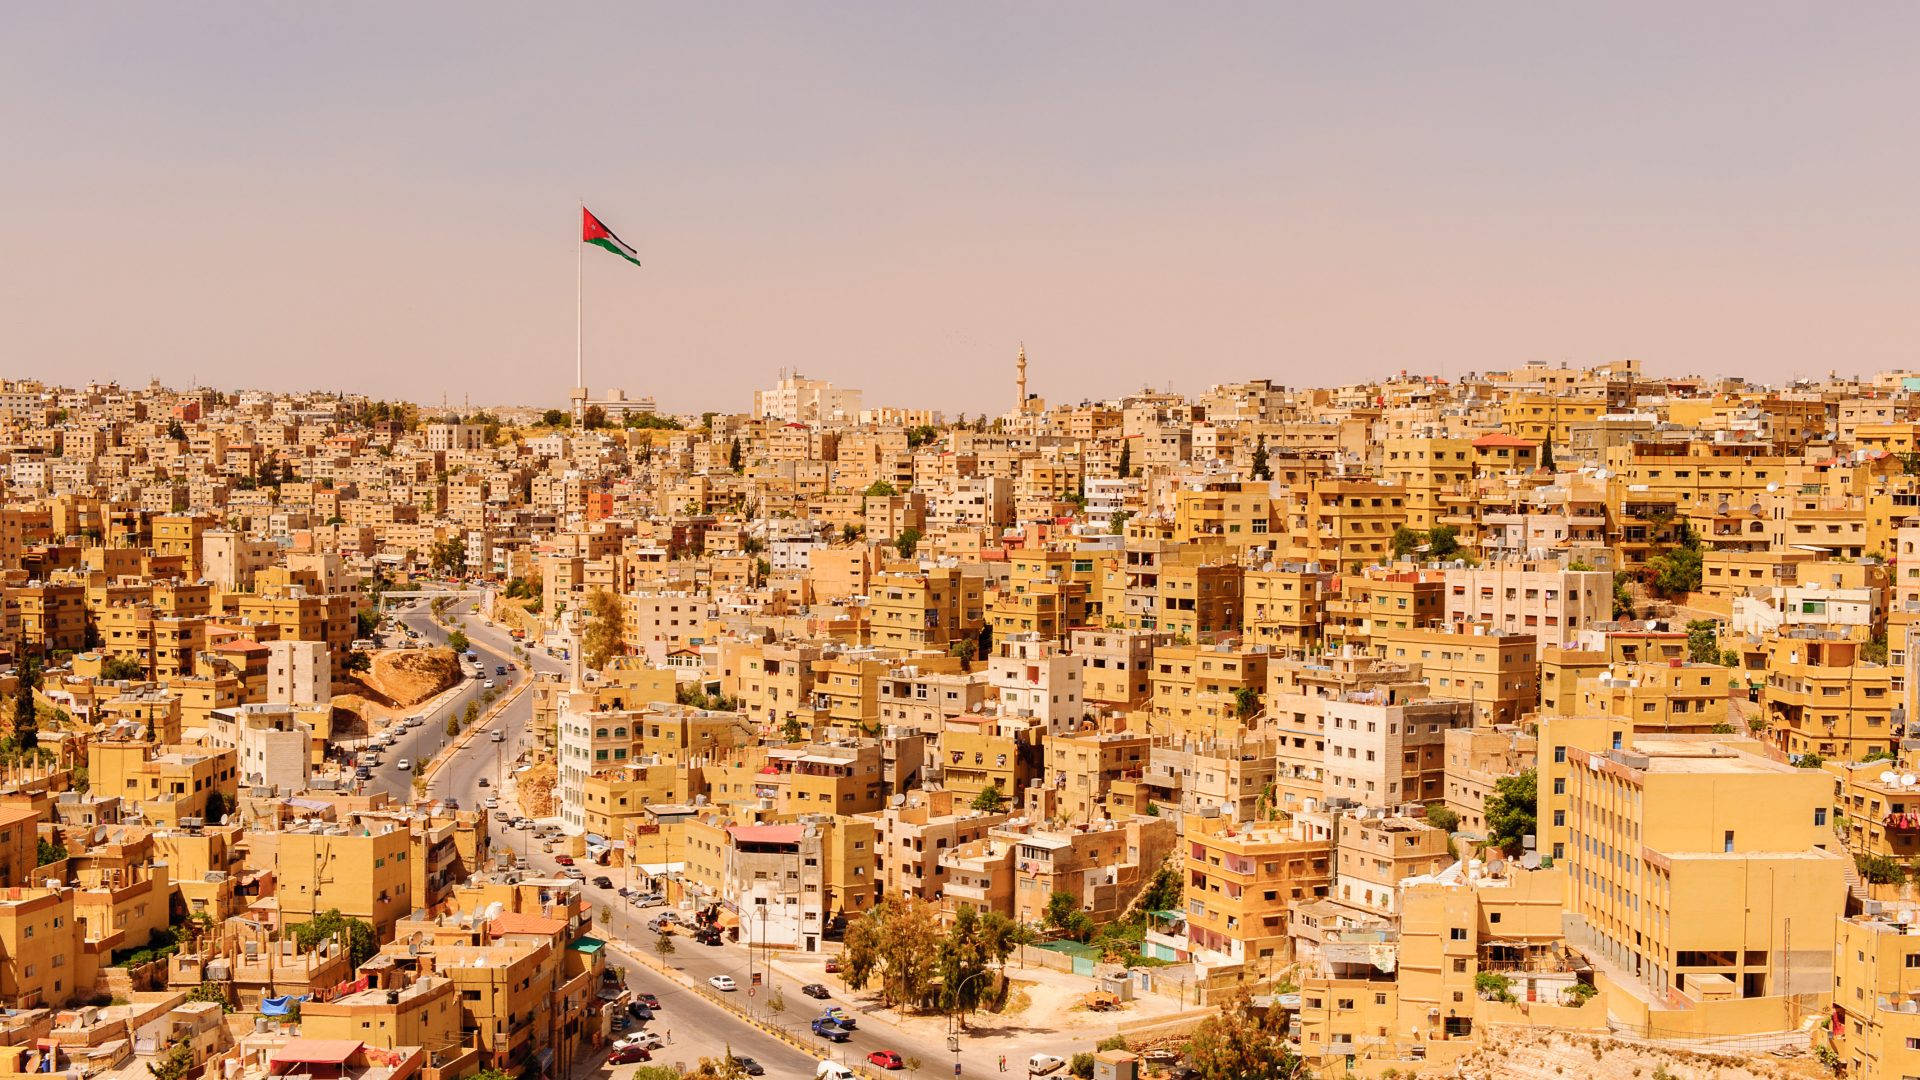 A view of Amman city, with the Jordanian flag